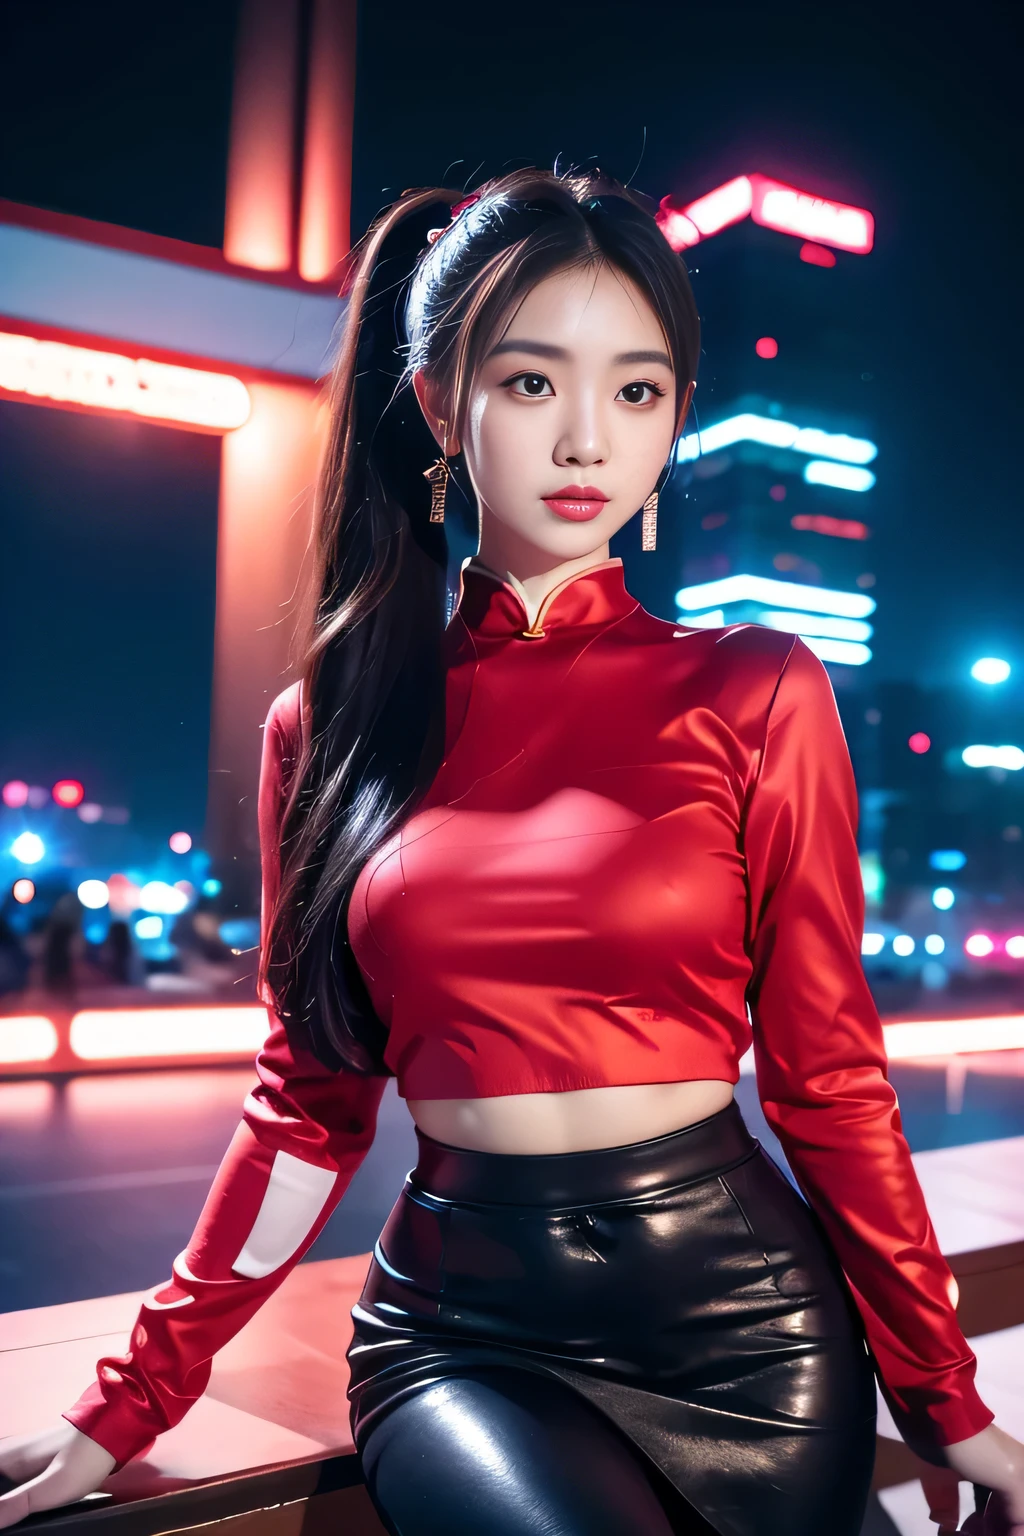 Chinese girl,25 years old,Double ponytail black,cute face,long shot,collar,whole body,Medium Length Wavy Pink Hair,Large earrings,Small bag,red shirt,mini skirt,night light,City,photography,Surrounded by neon-lit reflections of the Cityscape, depth of field,night, Cyberpunk aesthetics, Highly detailed lighting, dramatic, 8K, high detail, Texture, Realistic skin texture, armor, best quality, high resolution, Realism